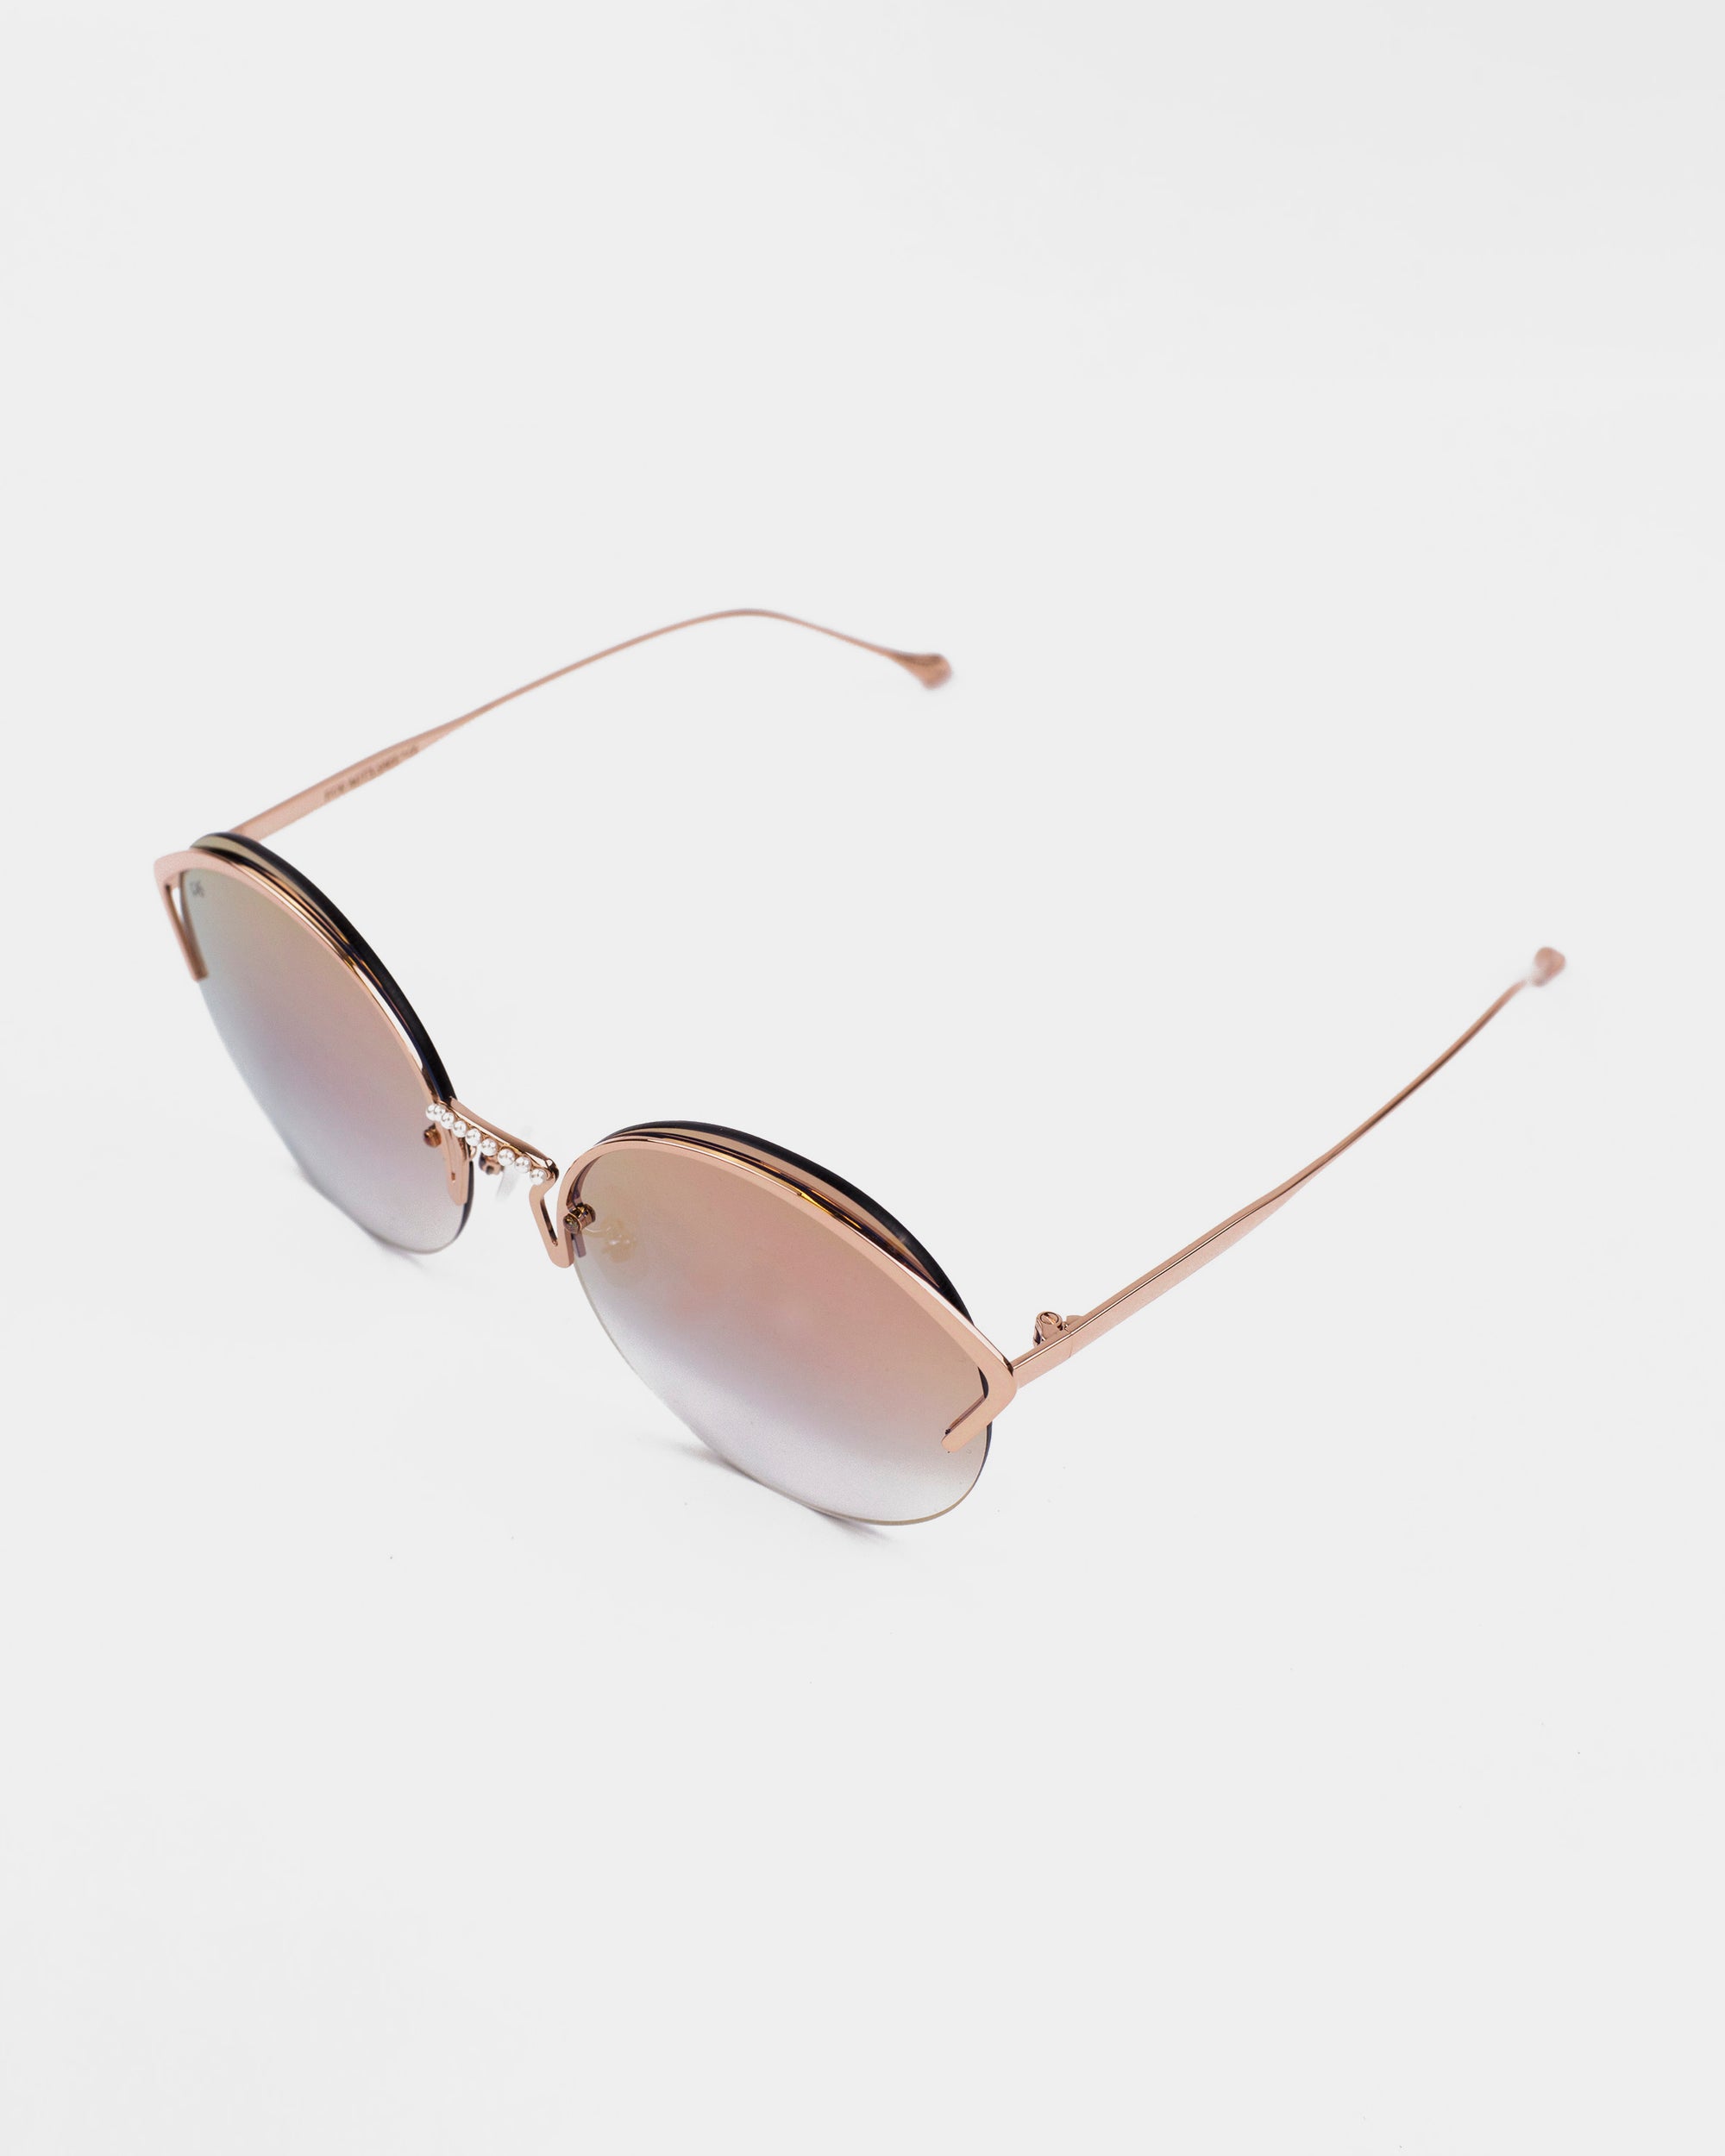 A pair of round, gold-framed For Art's Sake® Margarita sunglasses with brown gradient nylon lenses offering UV protection. The sunglasses feature thin temples and a stylish, minimalist design, set against a white background.